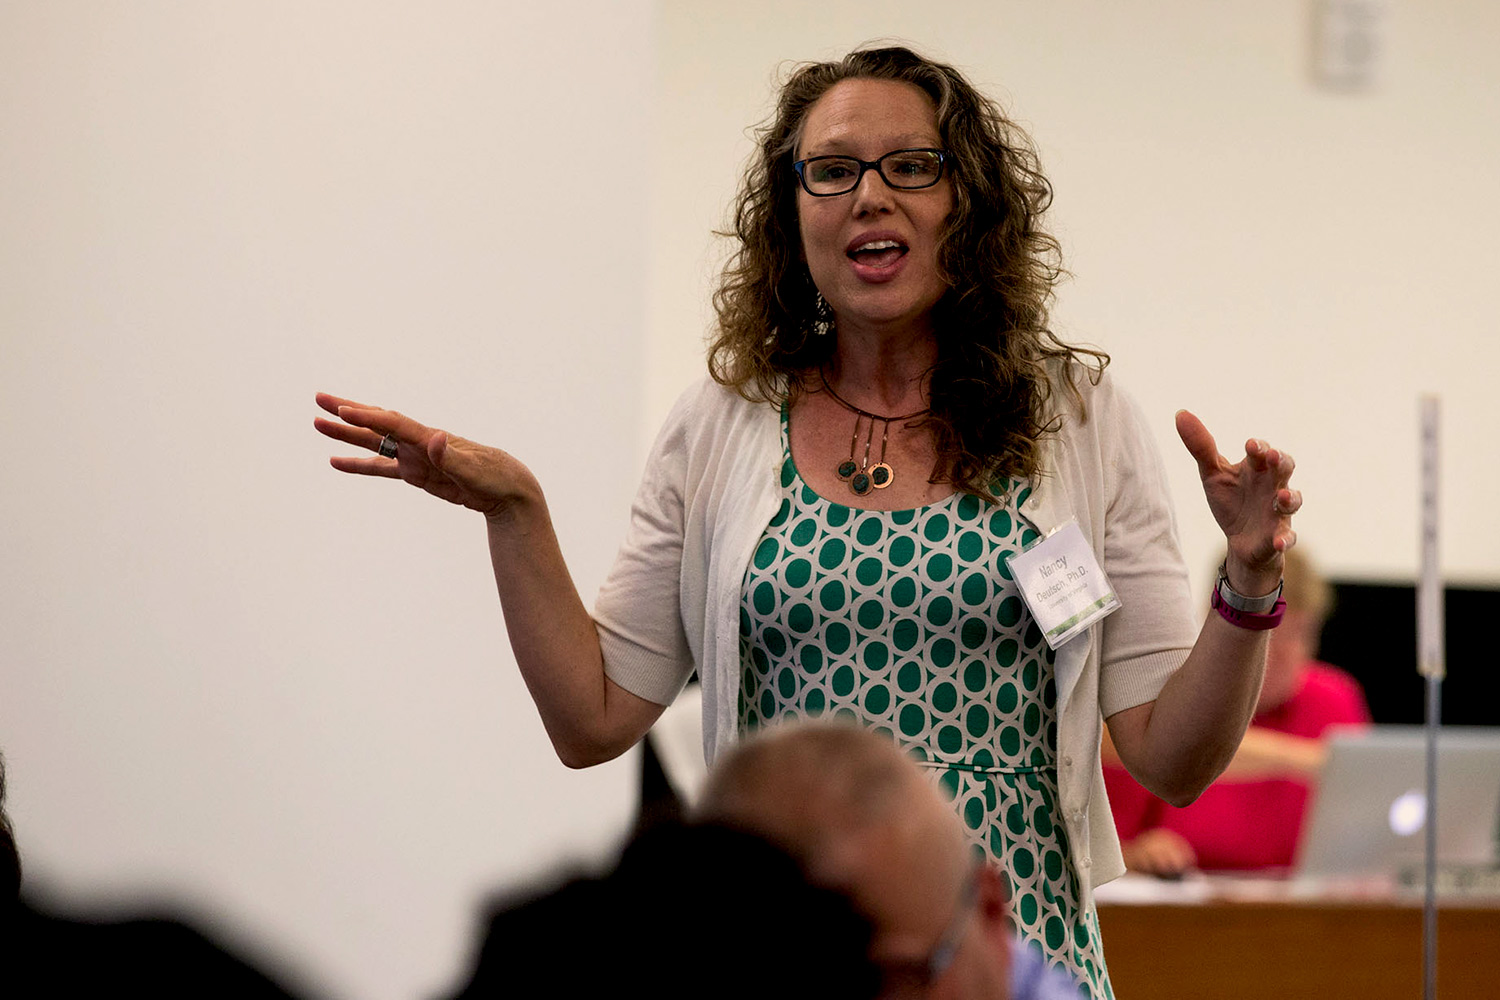 Nancy Deutsch, an associate professor in the Curry School of Education, led a discussion on developing strategies to prevent and respond to incidences of violence on college campuses.